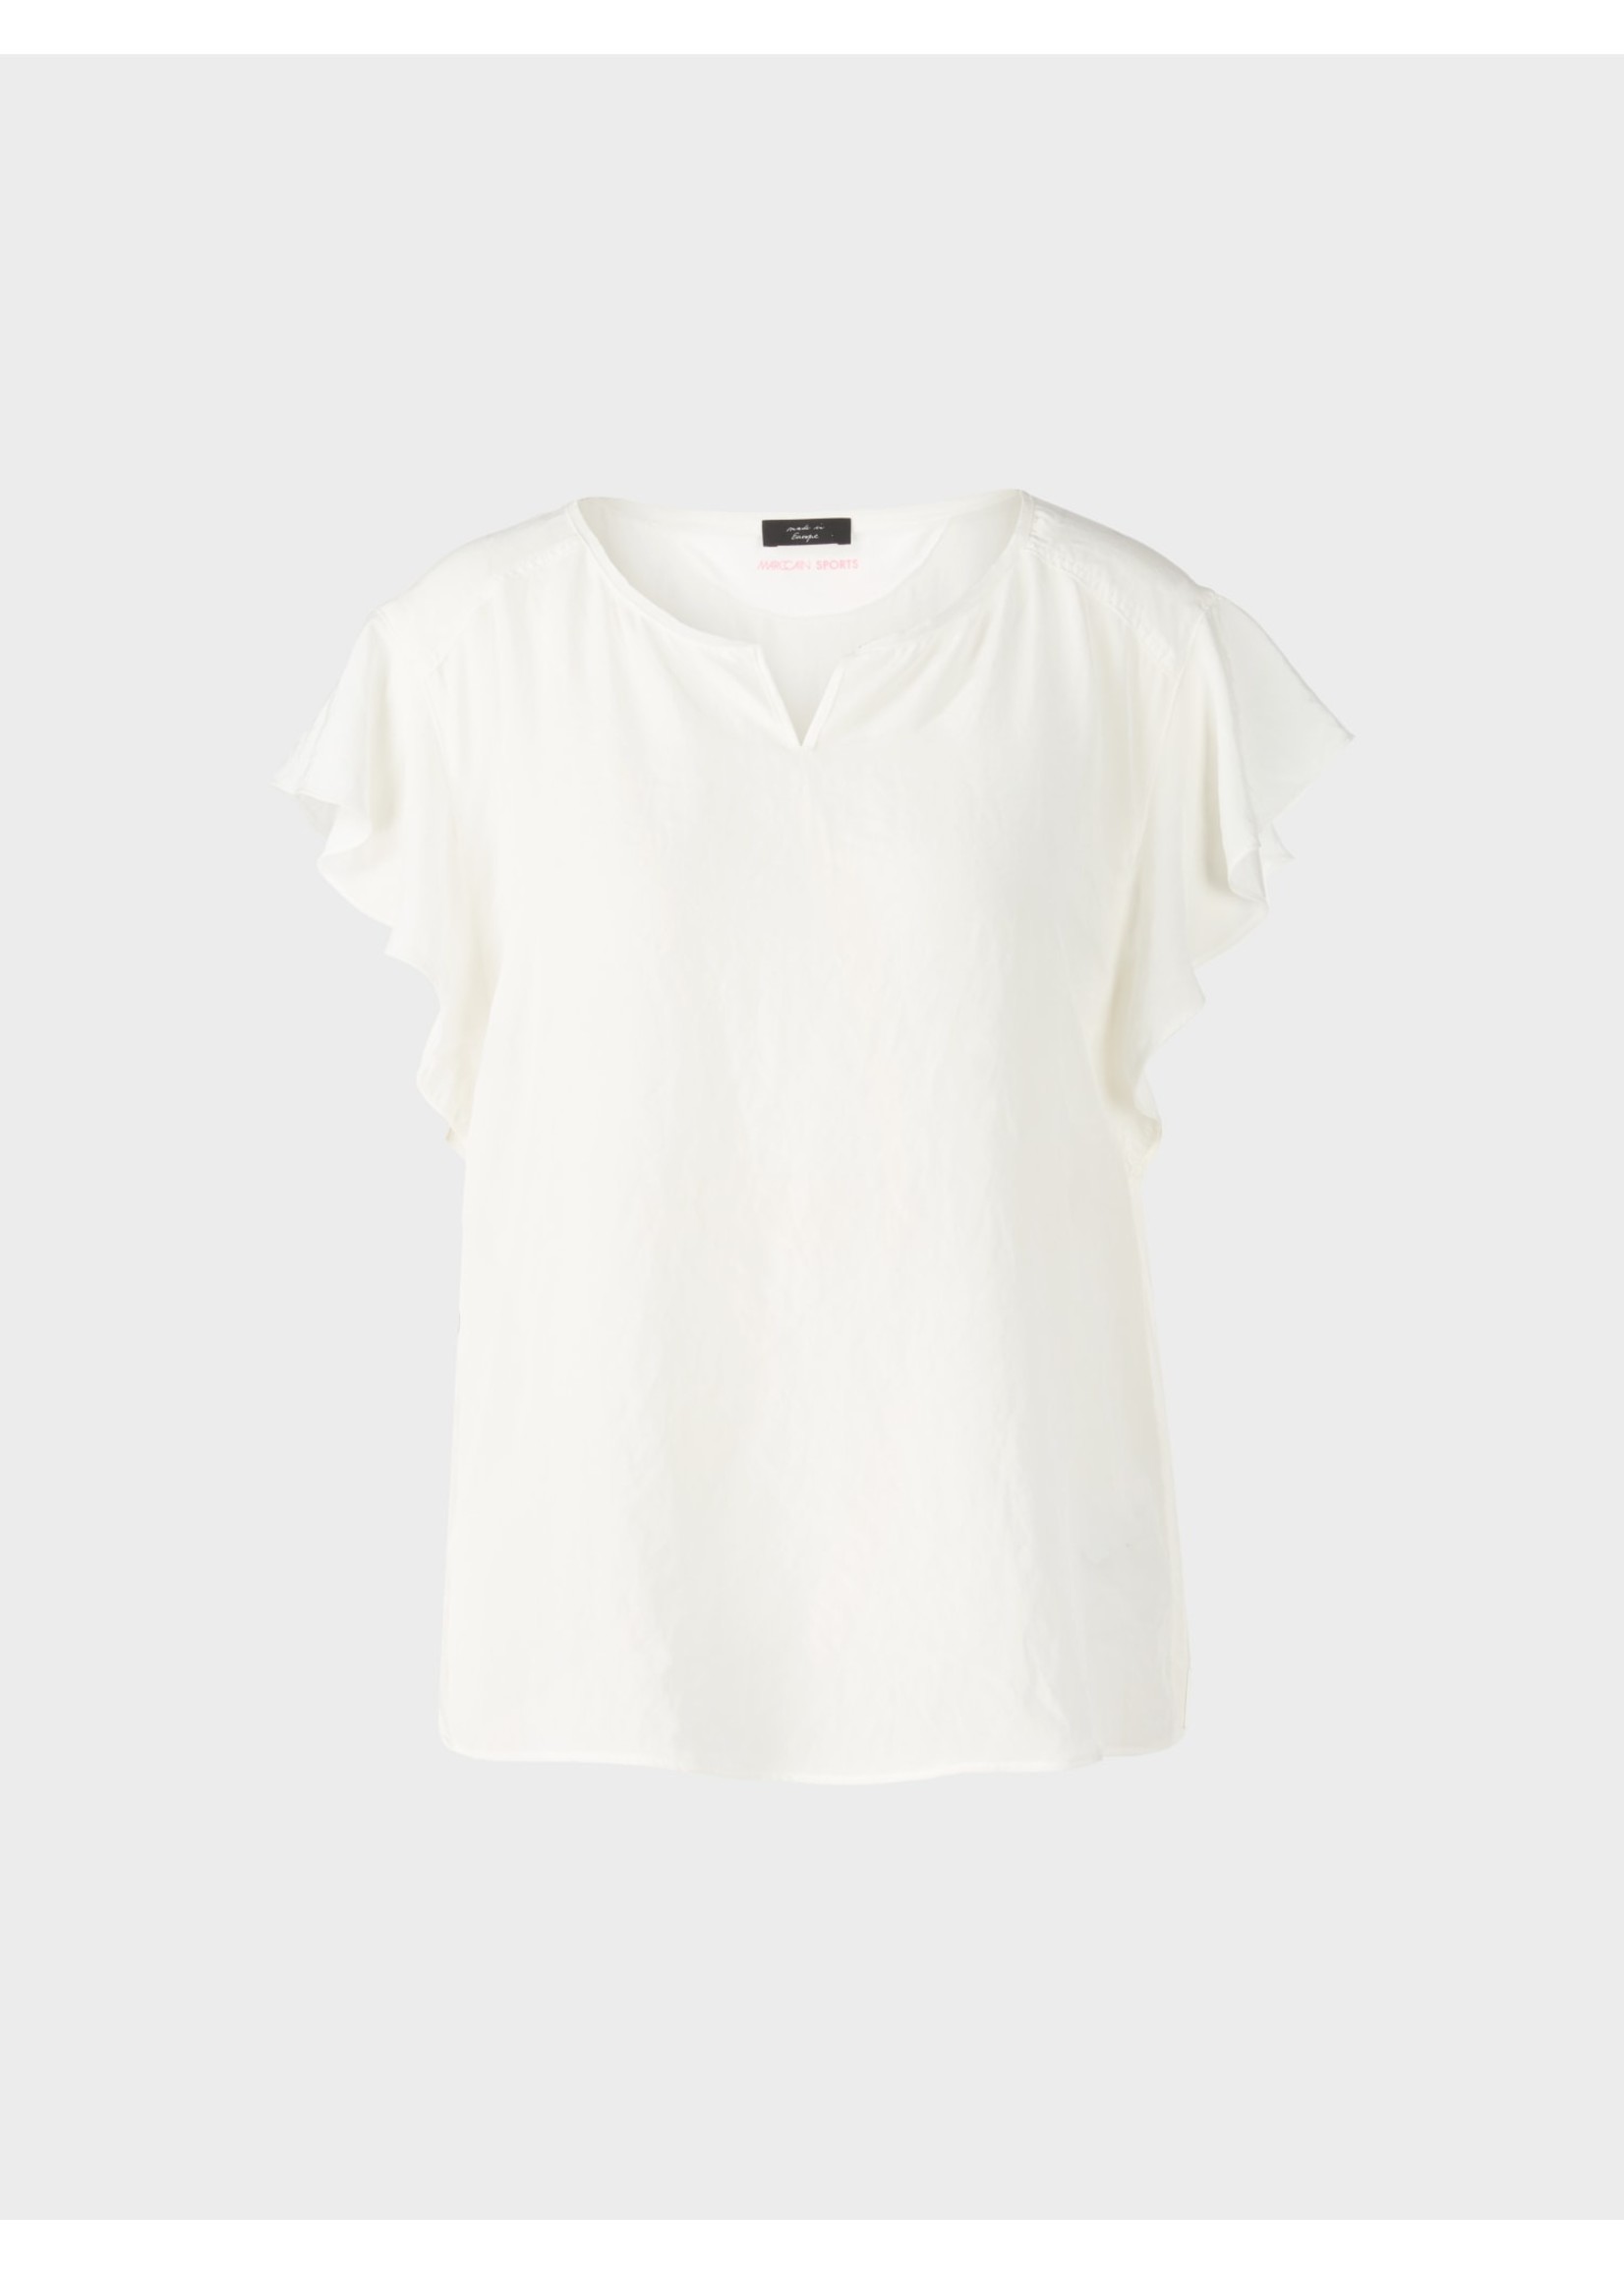 Marccain Sports Blouse  US 55.05 W76 110